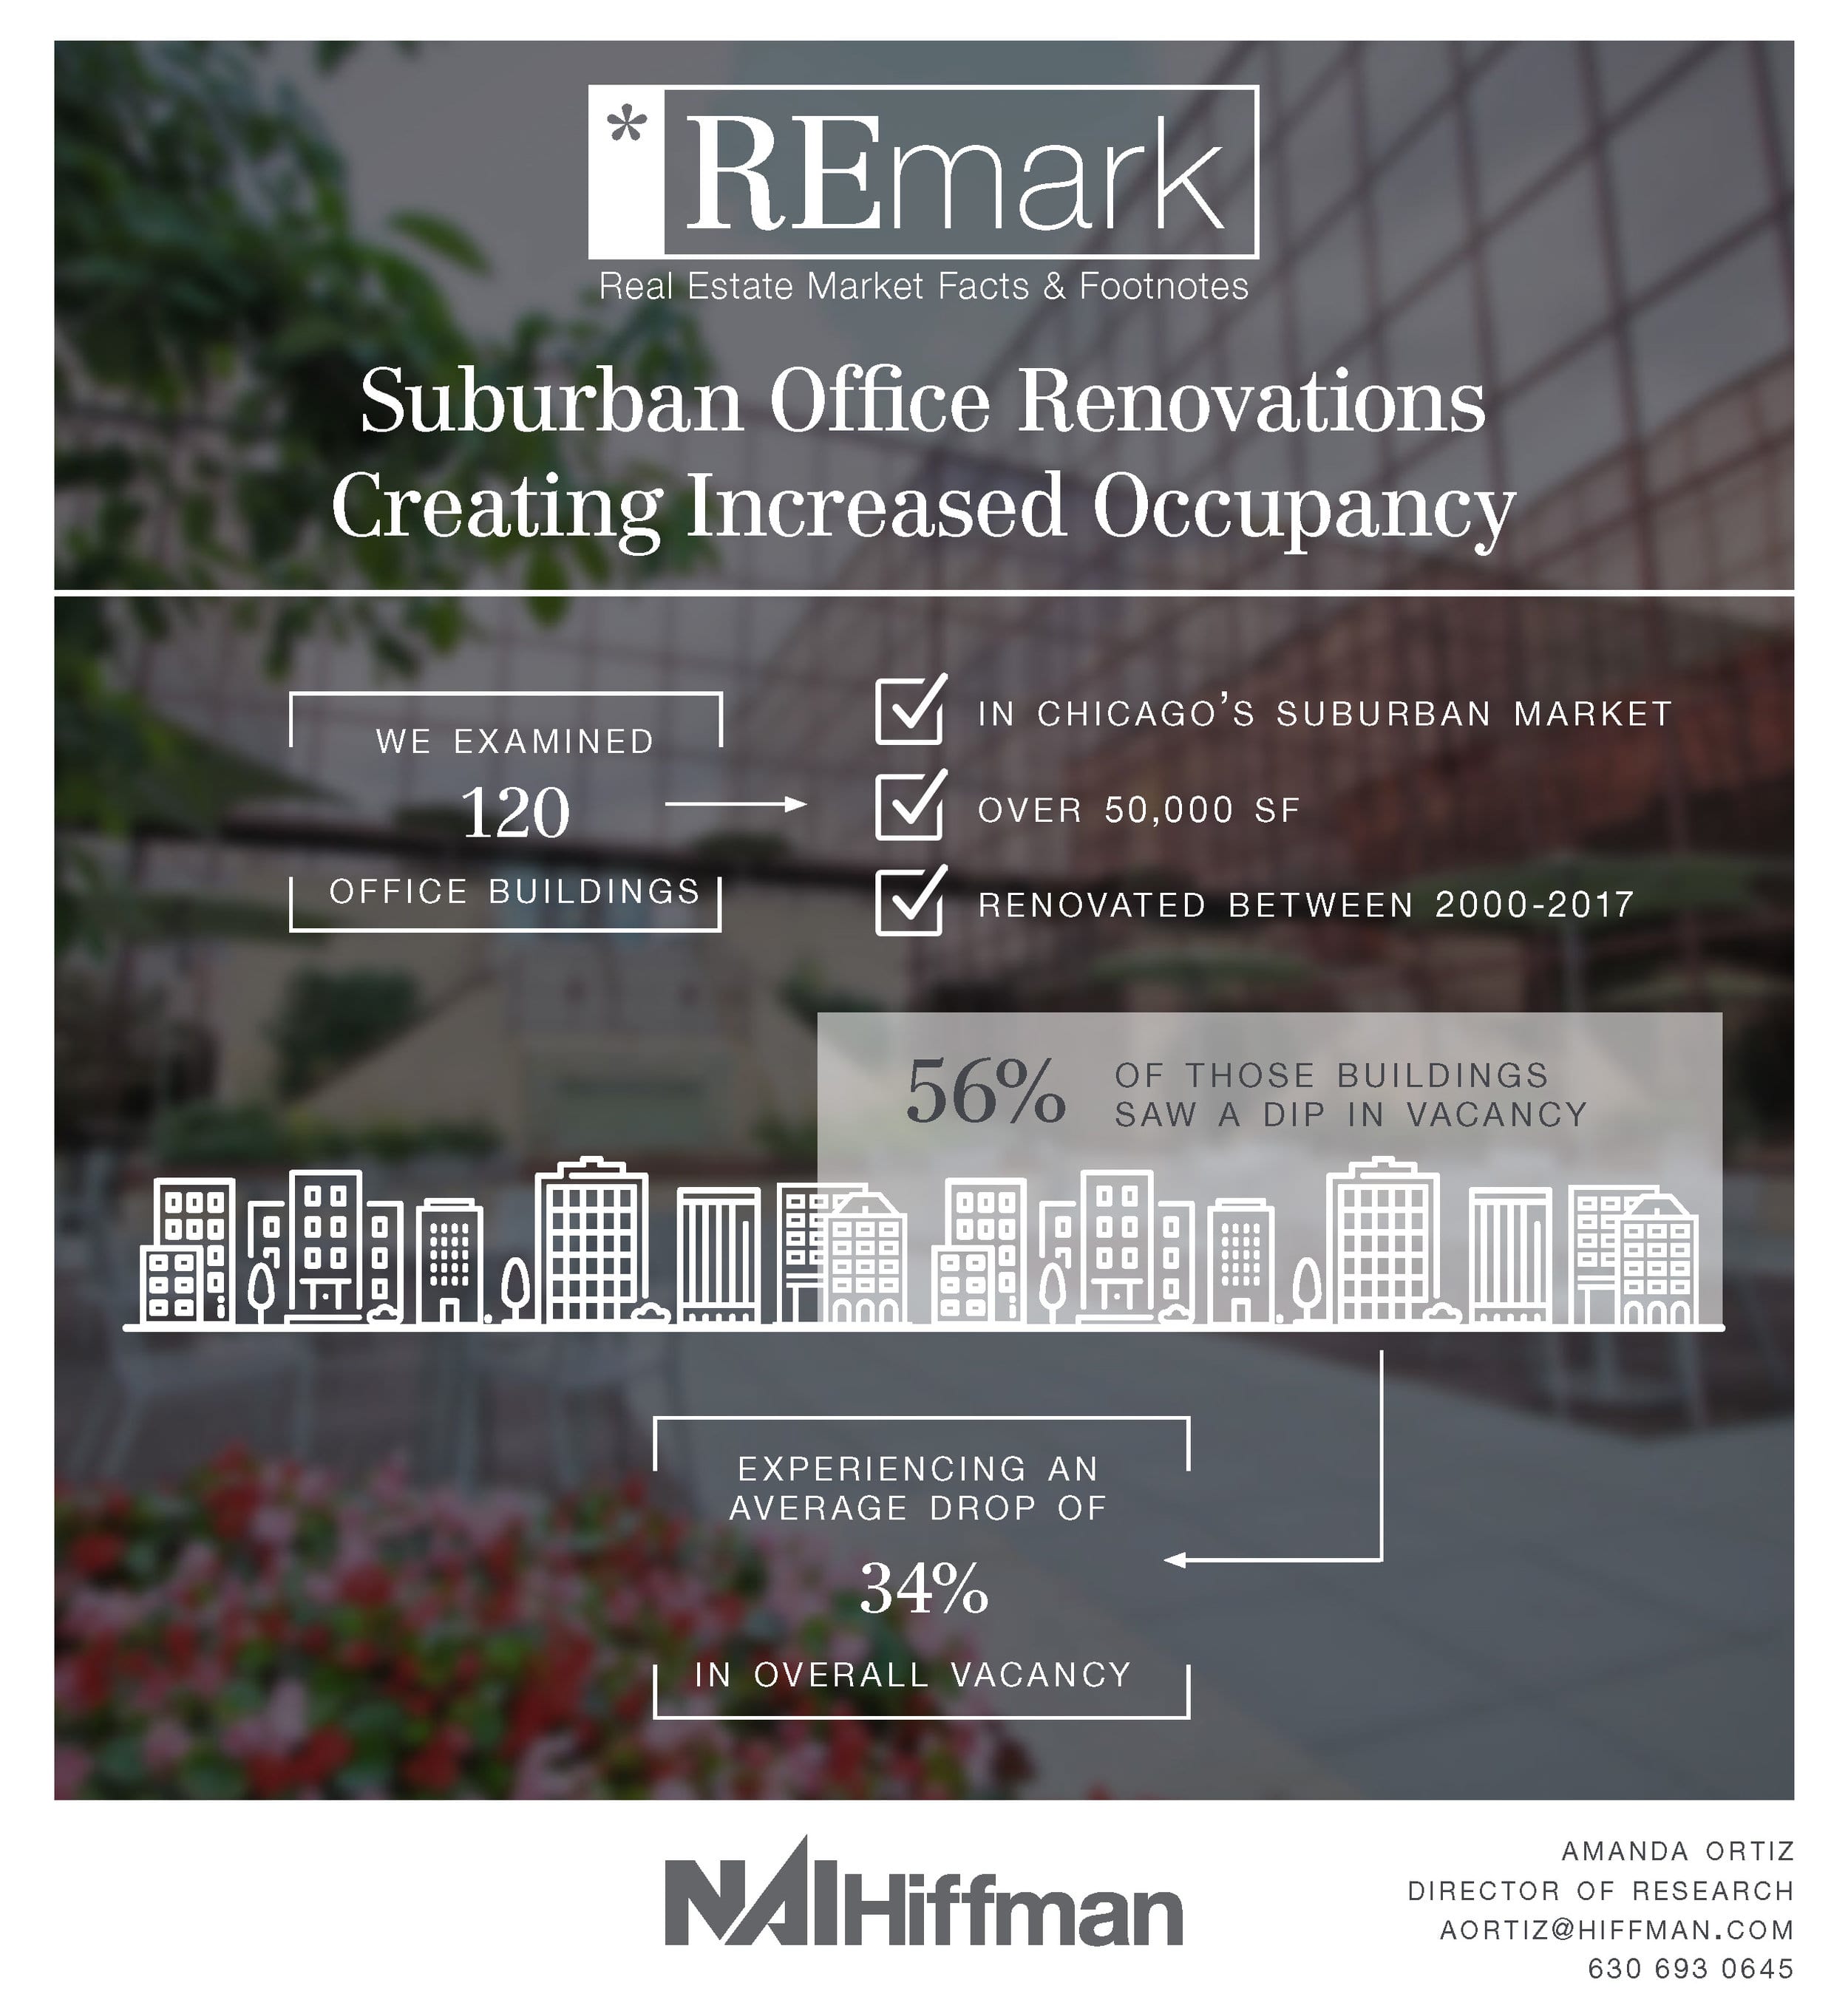 REmark: Suburban Office Renovations Creating Increased Occupancy